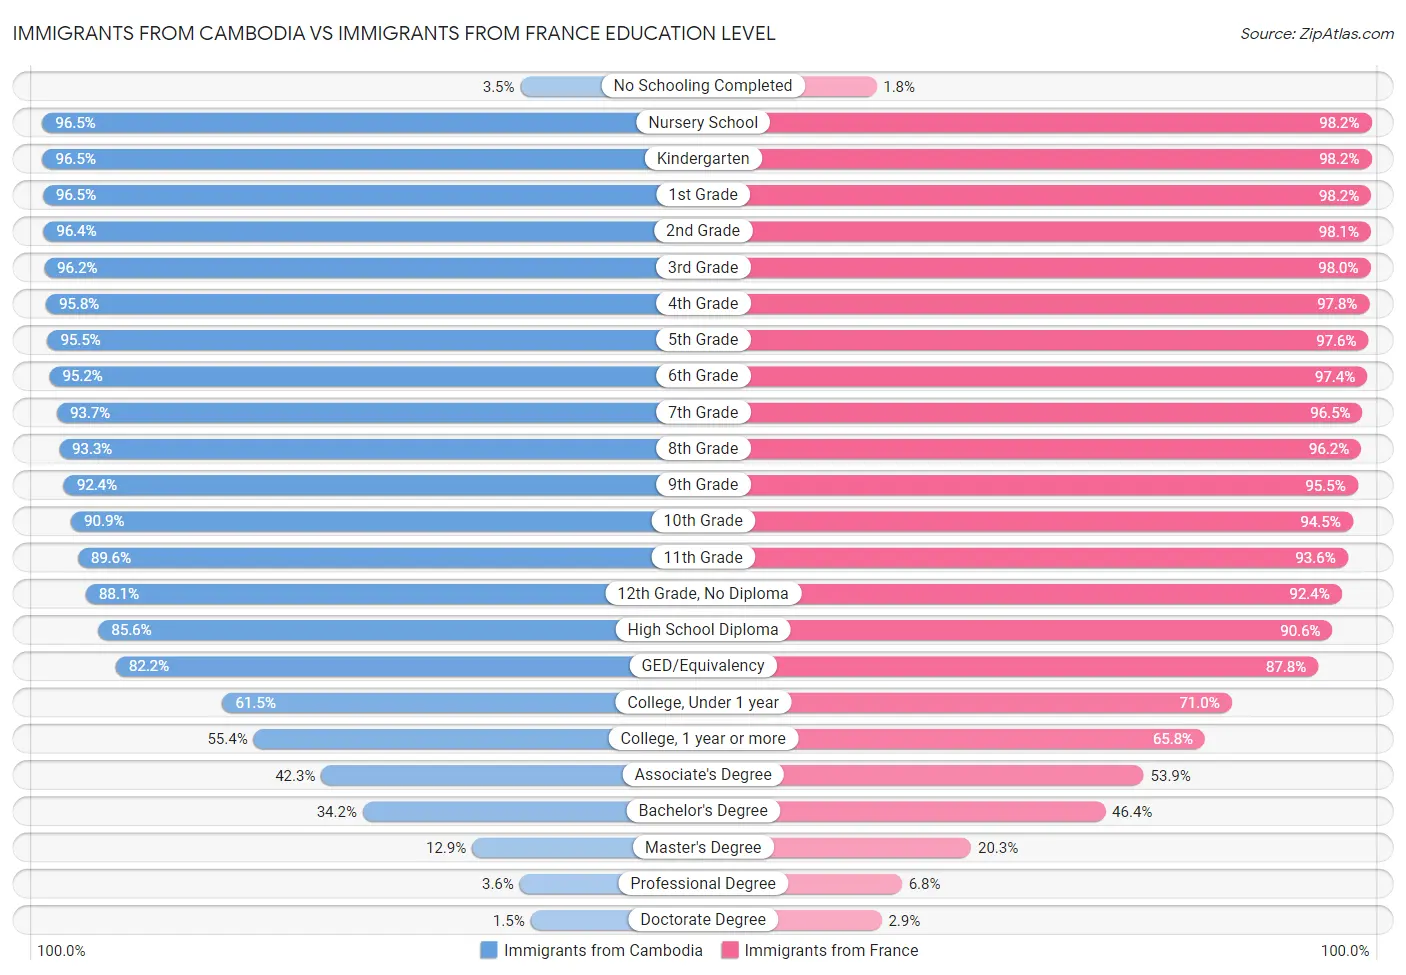 Immigrants from Cambodia vs Immigrants from France Education Level